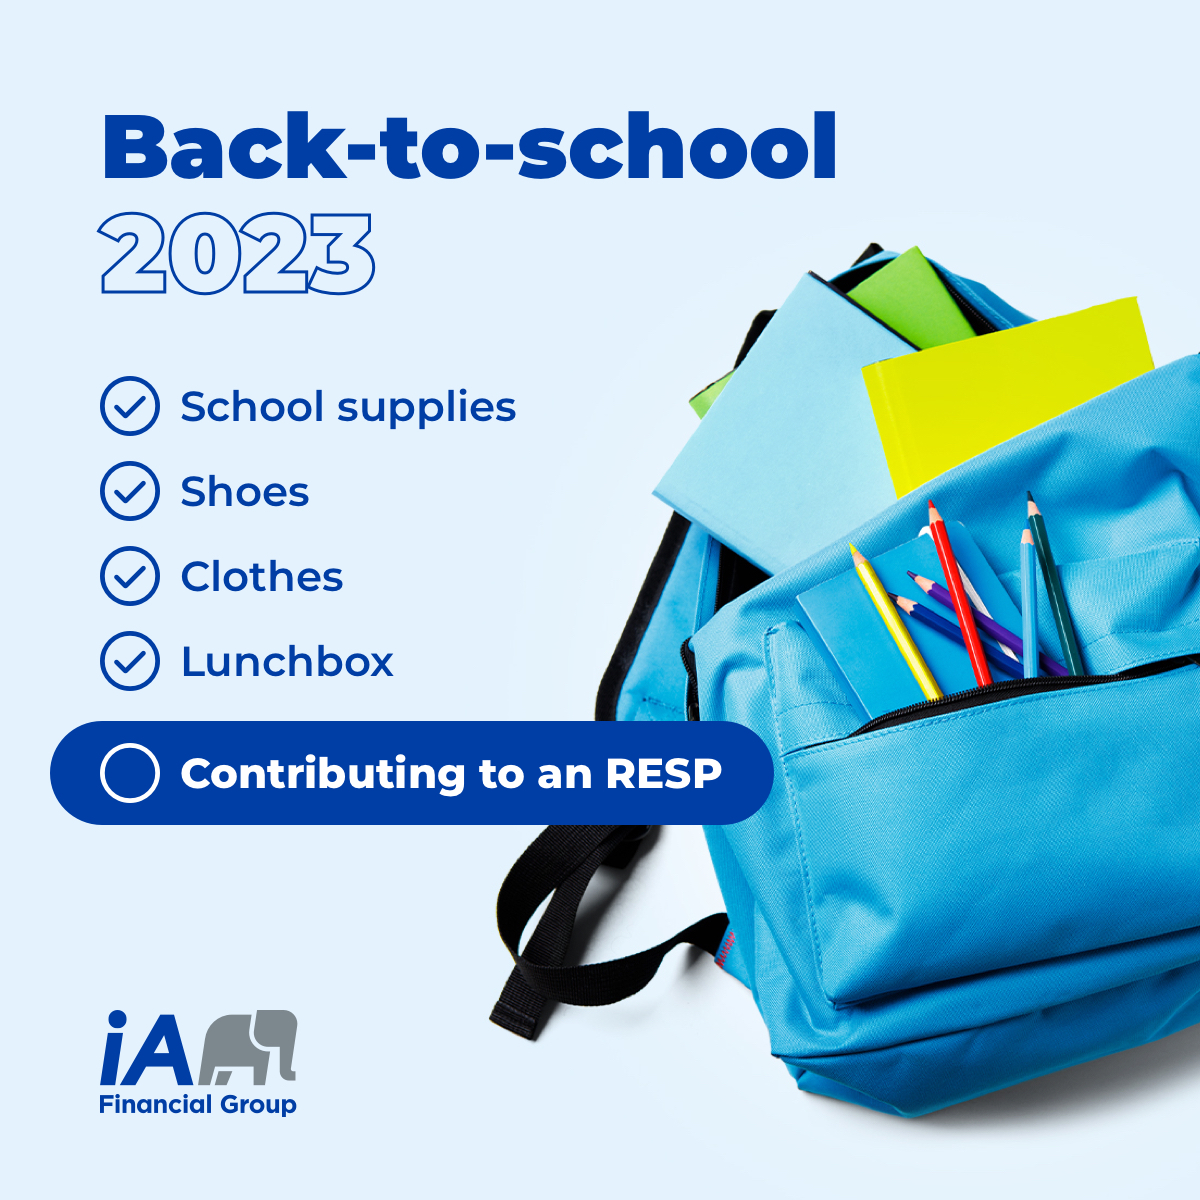 Back-to-school | Preparation = Success! 📚
Also think about contributing to a registered education savings plan (RESP) for your kids by this you can get the free govt. education grant ! 💻 It’s easy. Contact me, I’m here if you need advice!
#investedinyou

ia.ca/resp?uid=A8B6DF